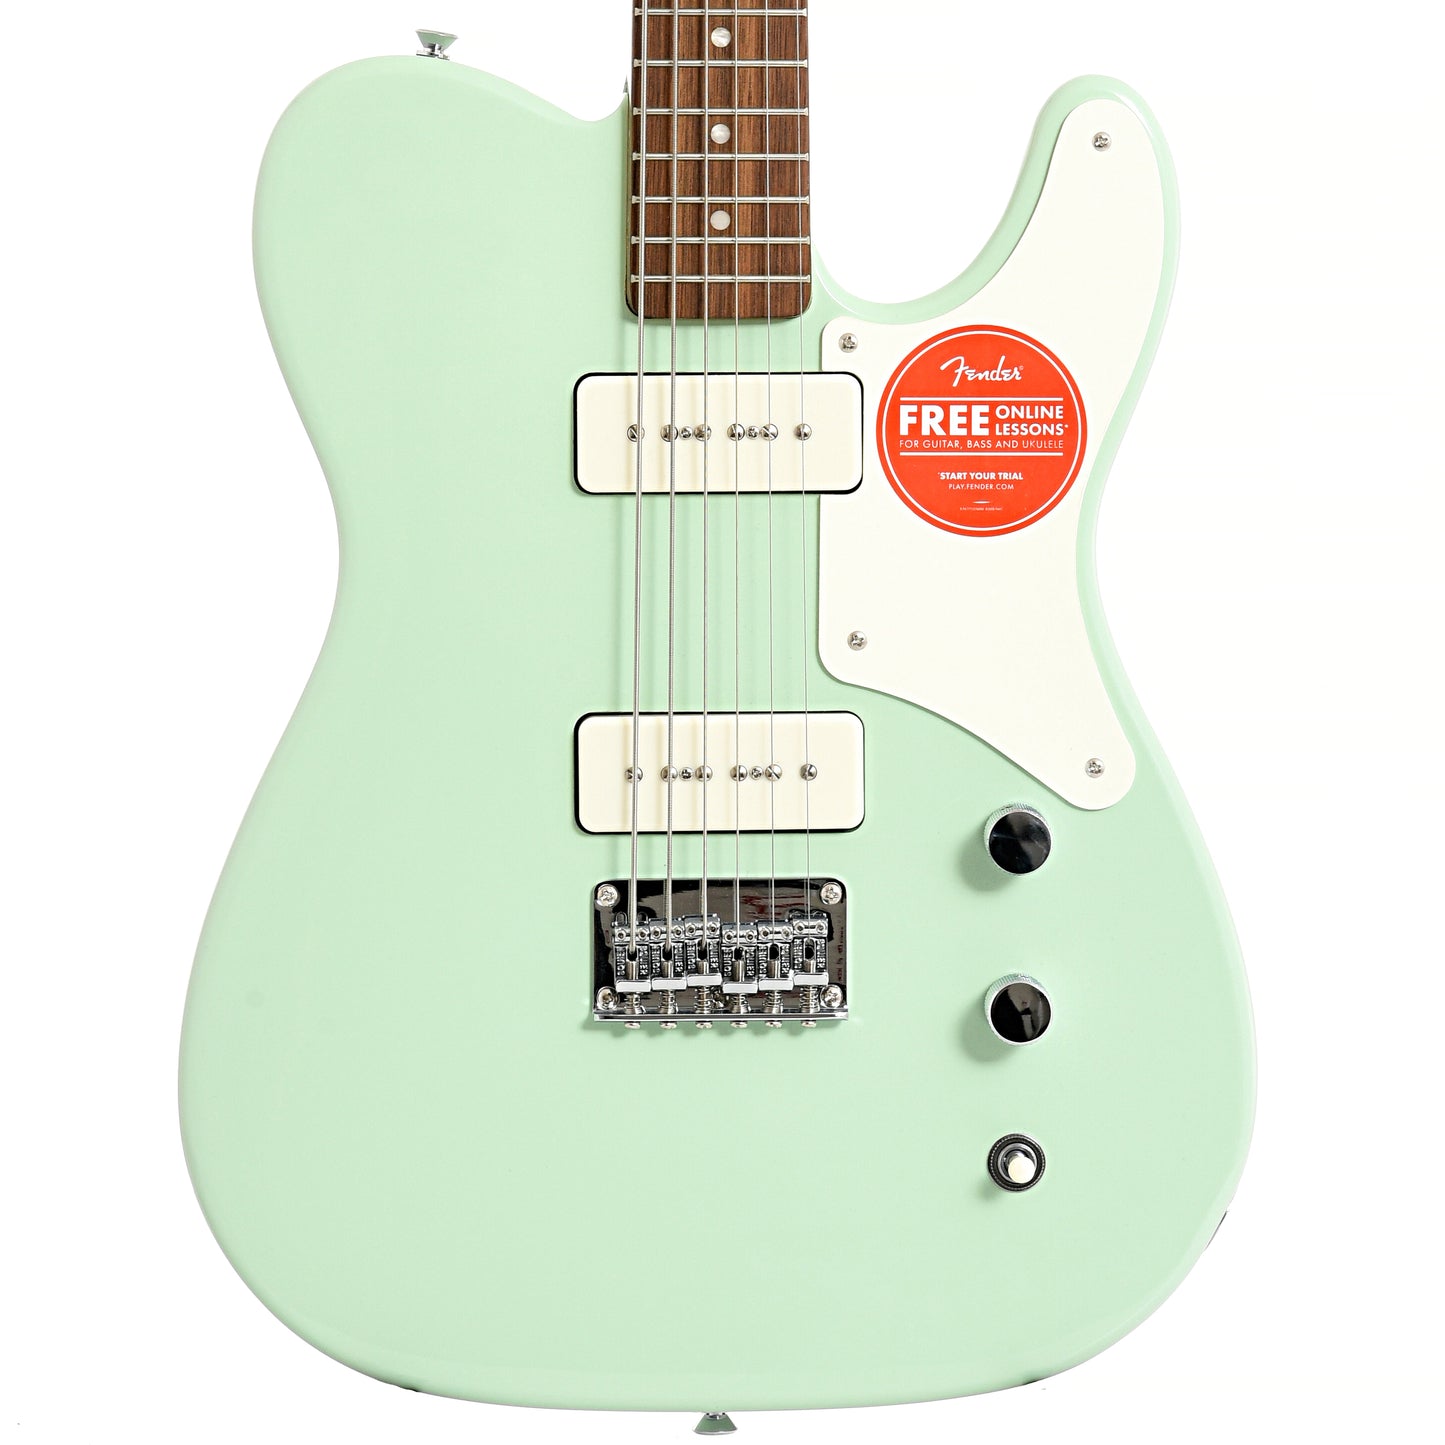 Image 2 of Squier Paranormal Baritone Cabronita Telecaster, Surf Green- SKU# SPBARICT-SFG : Product Type Other : Elderly Instruments